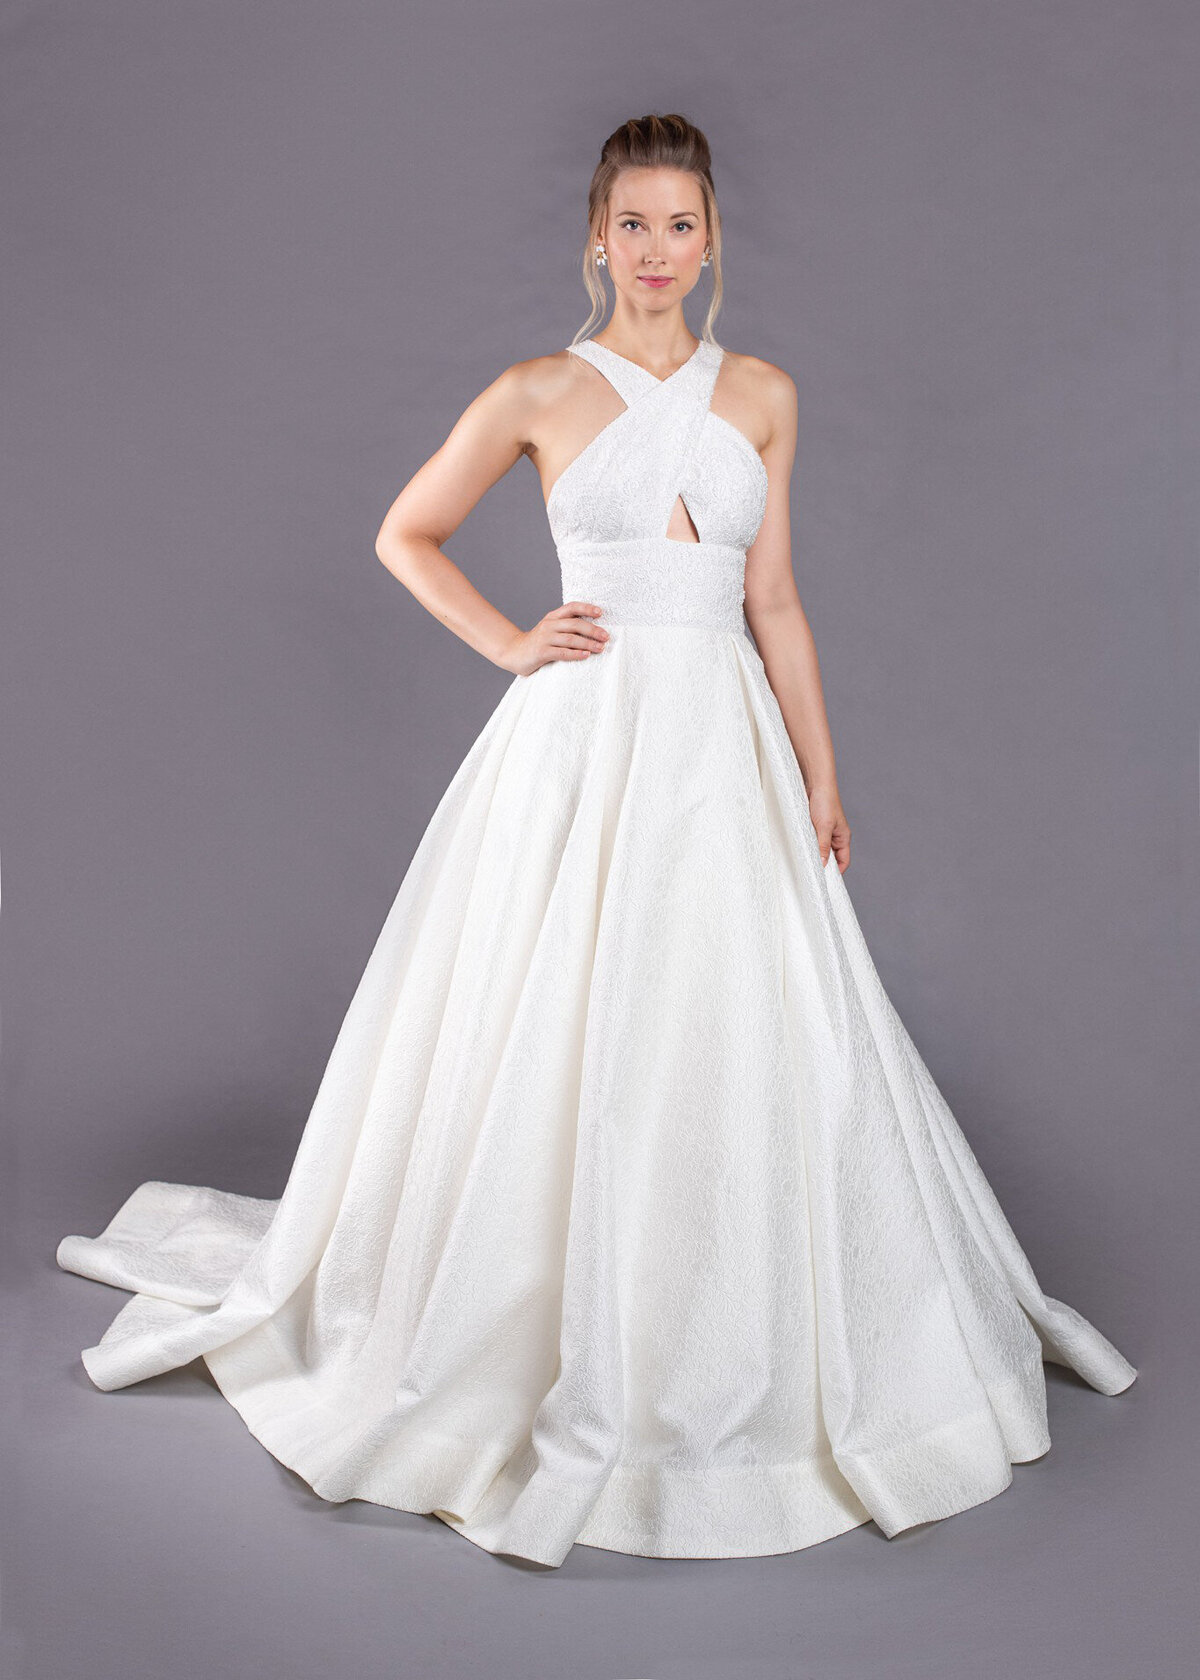 The Joan style is a timeless but modern ballgown wedding dress in a textured floral fabric and cross-over neckline.\